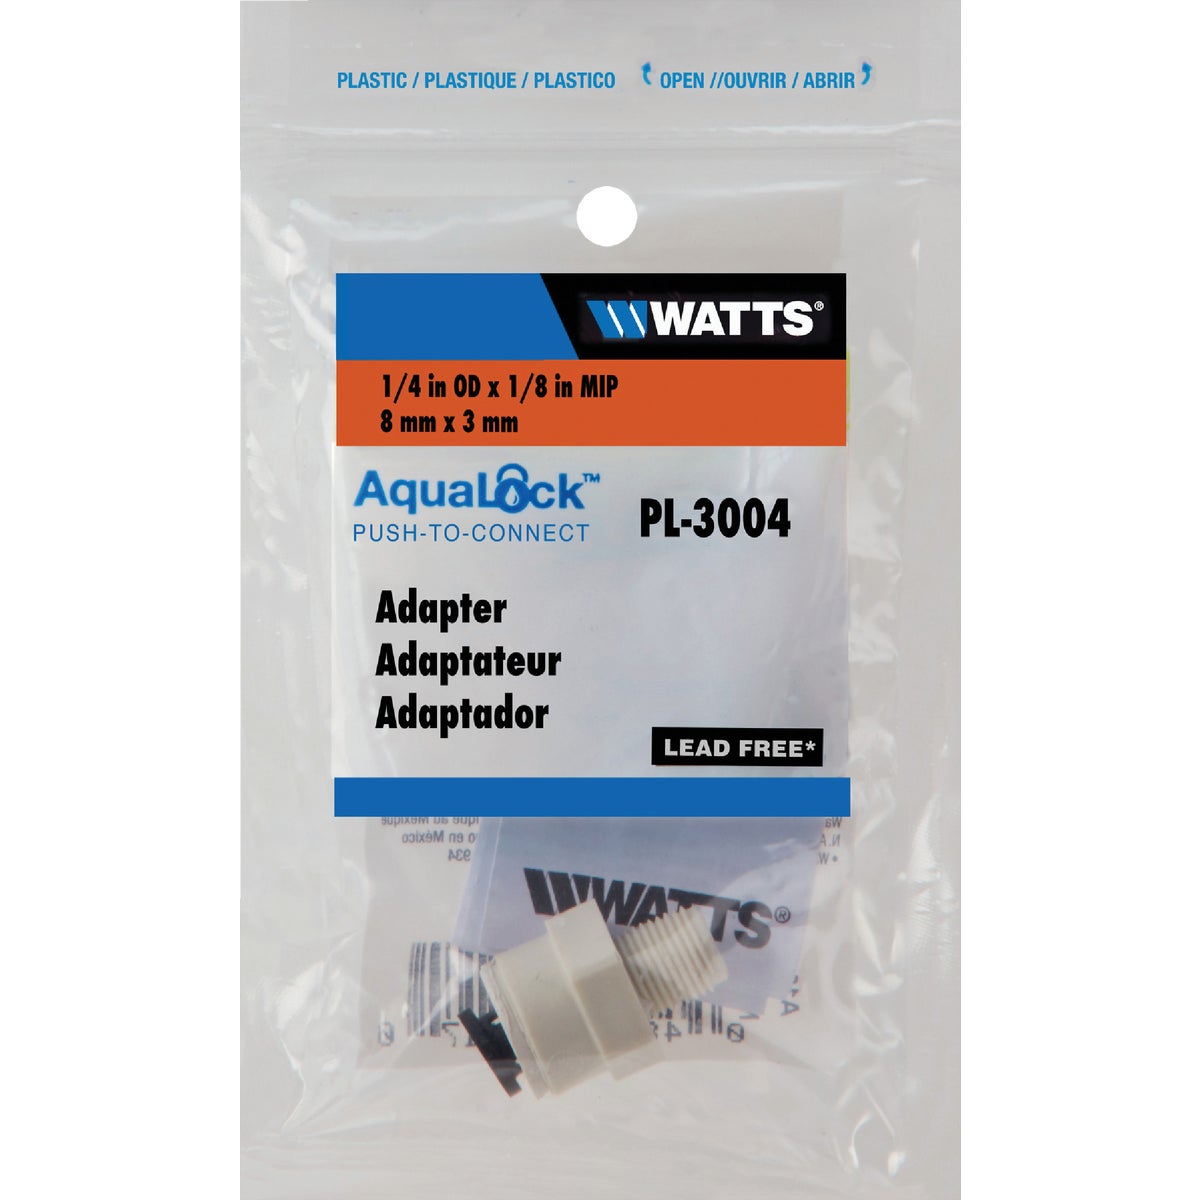 Watts Aqualock 1/4 In. OD x 1/8 In. MPT Push-to Connect Plastic Adapter